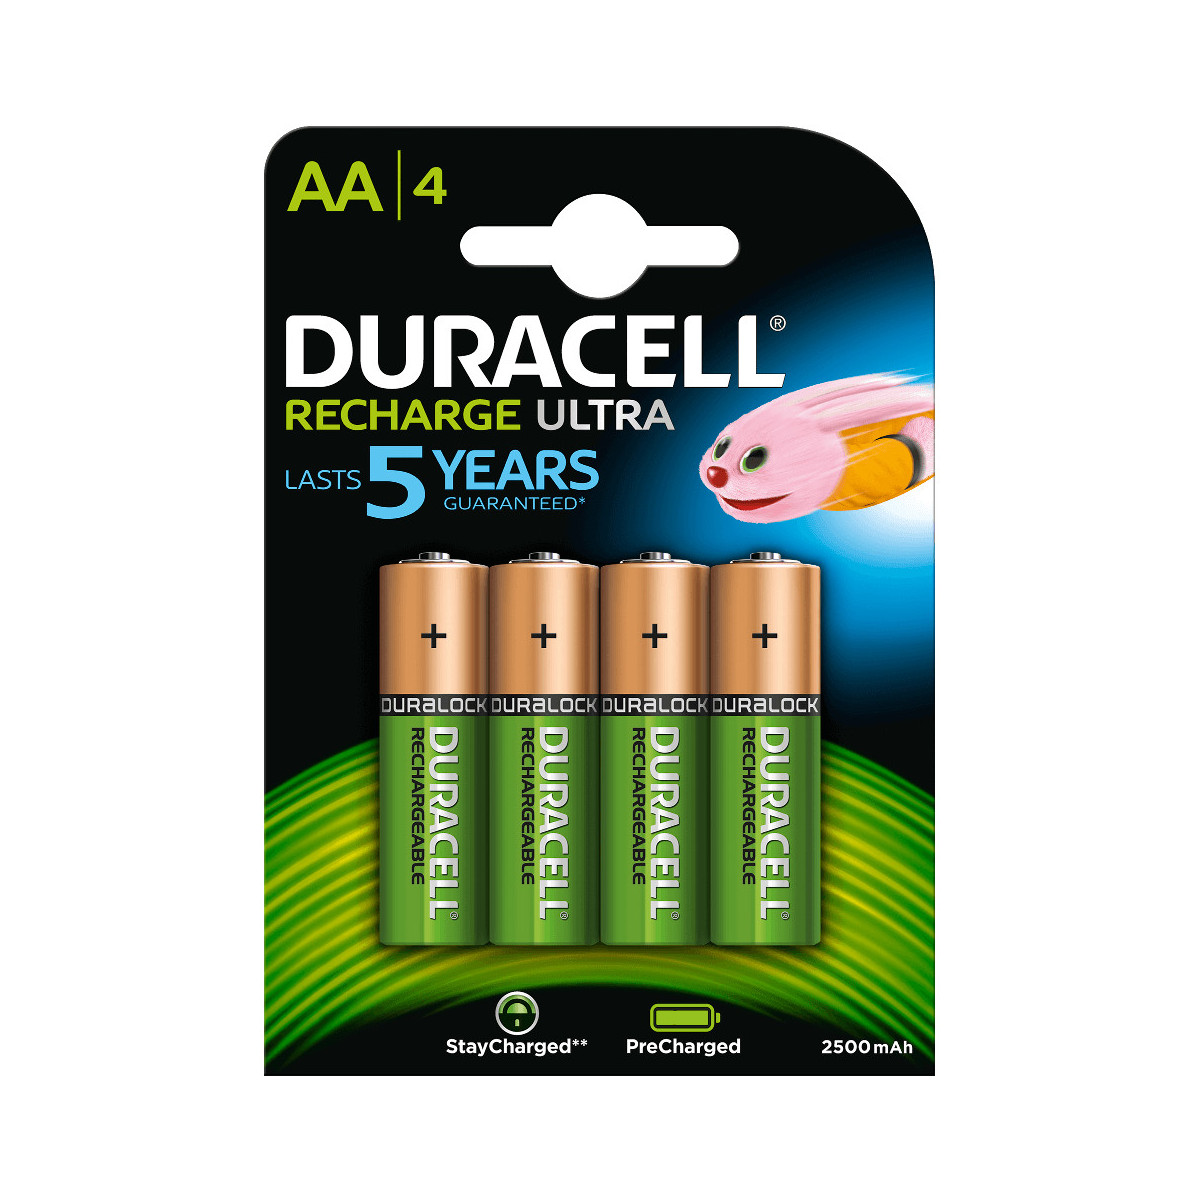 duracell rechargeable batteries directions